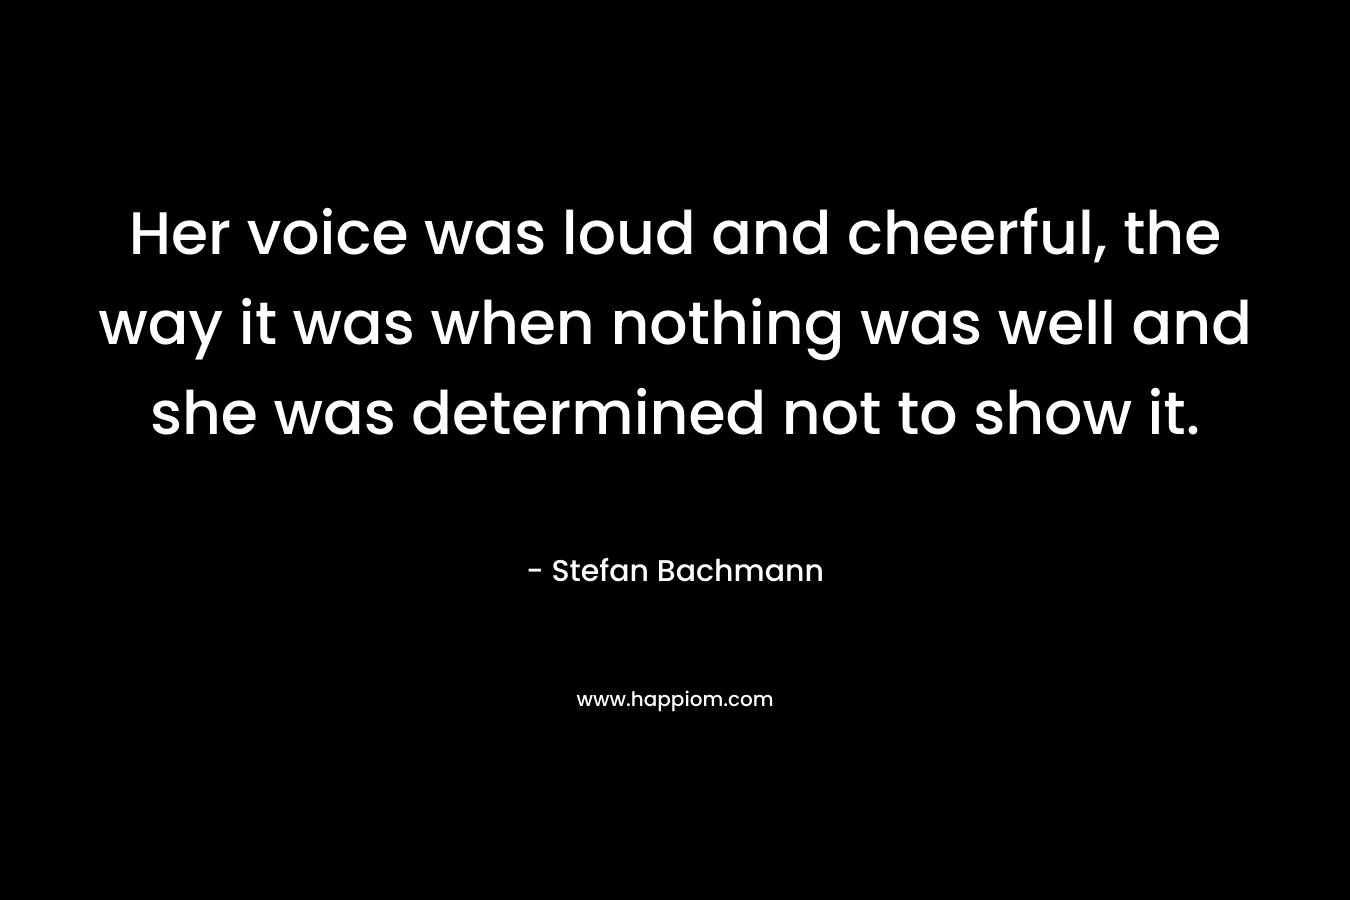 Her voice was loud and cheerful, the way it was when nothing was well and she was determined not to show it. – Stefan Bachmann